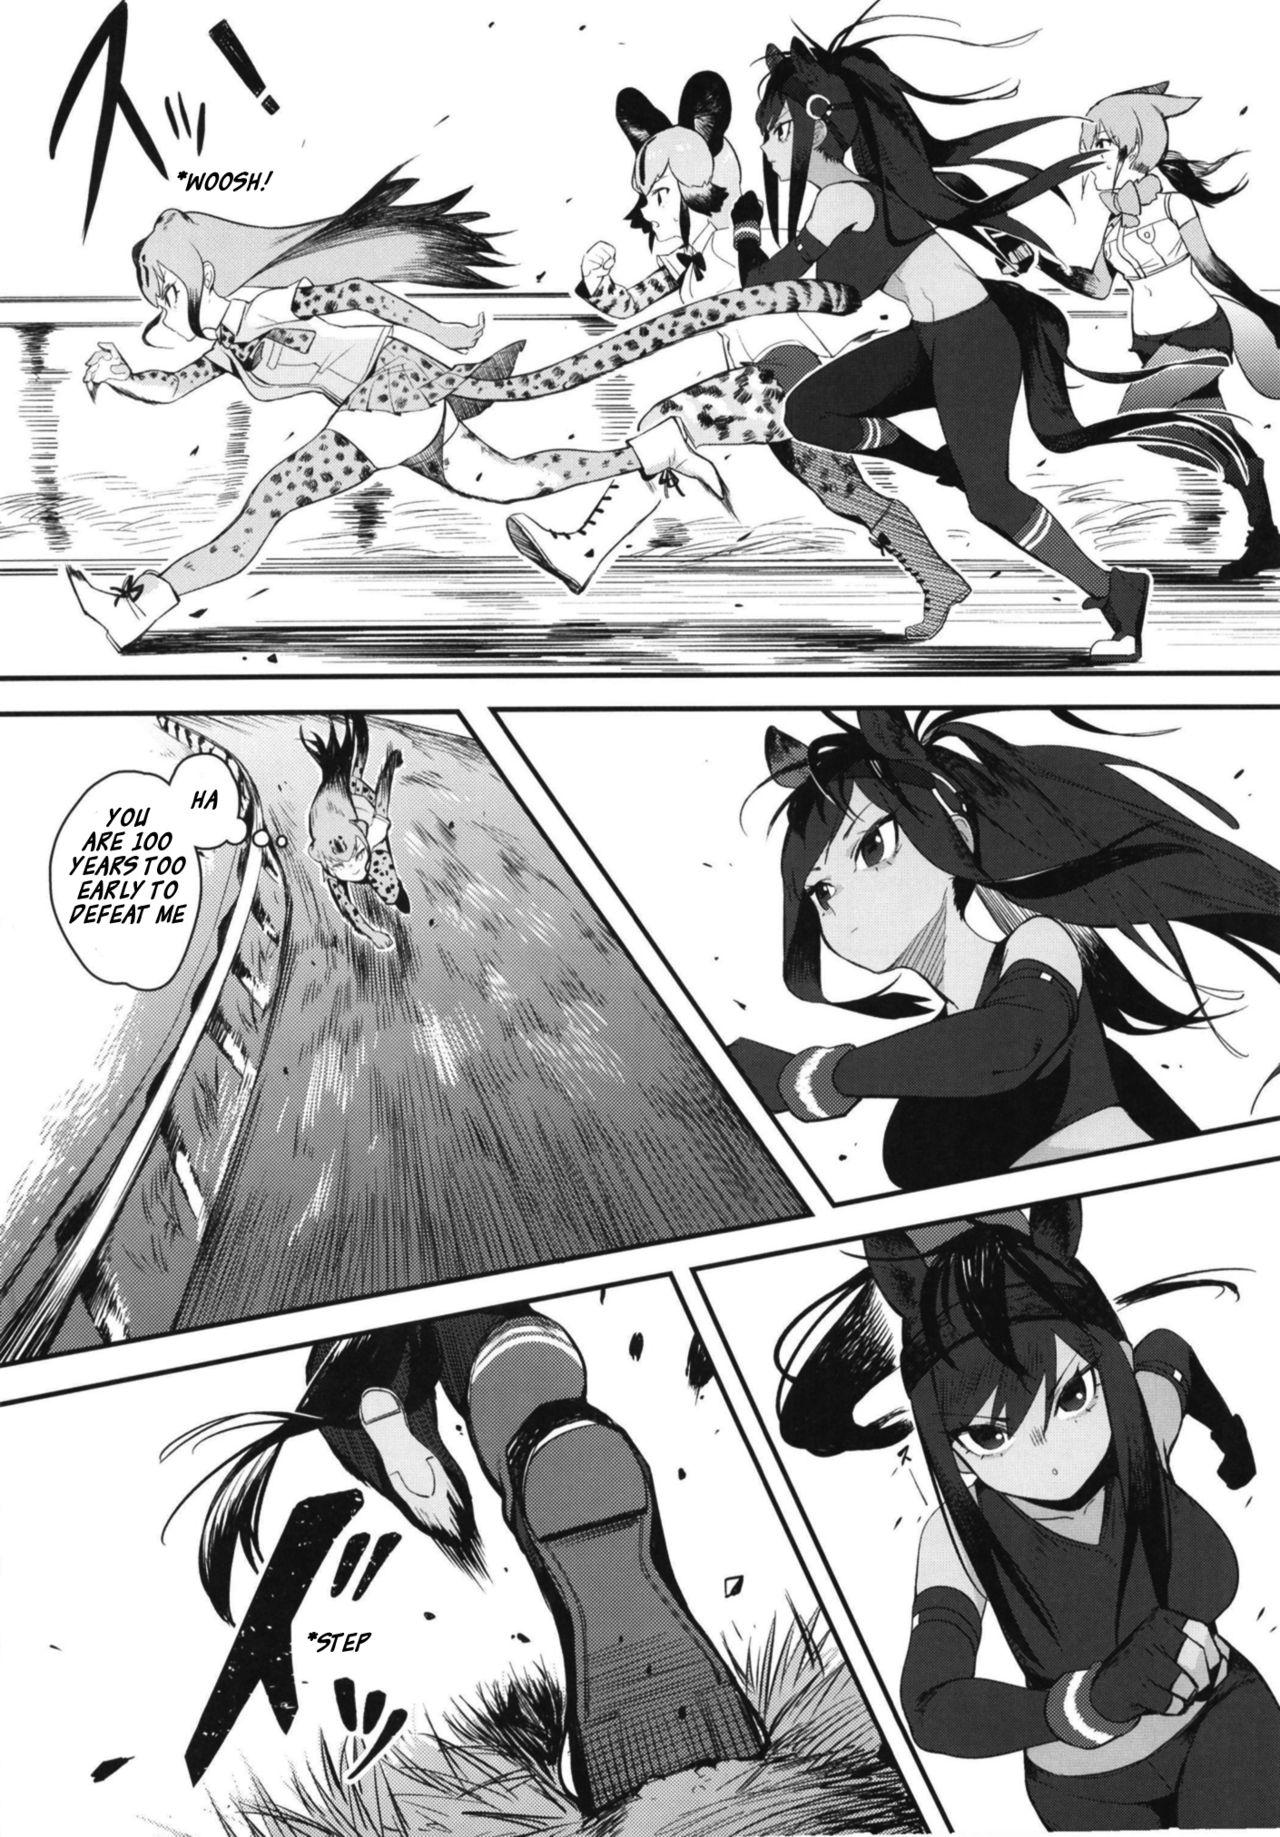 Trap Thoroughbred Early Days 2 - Kemono friends Blowjob - Page 4